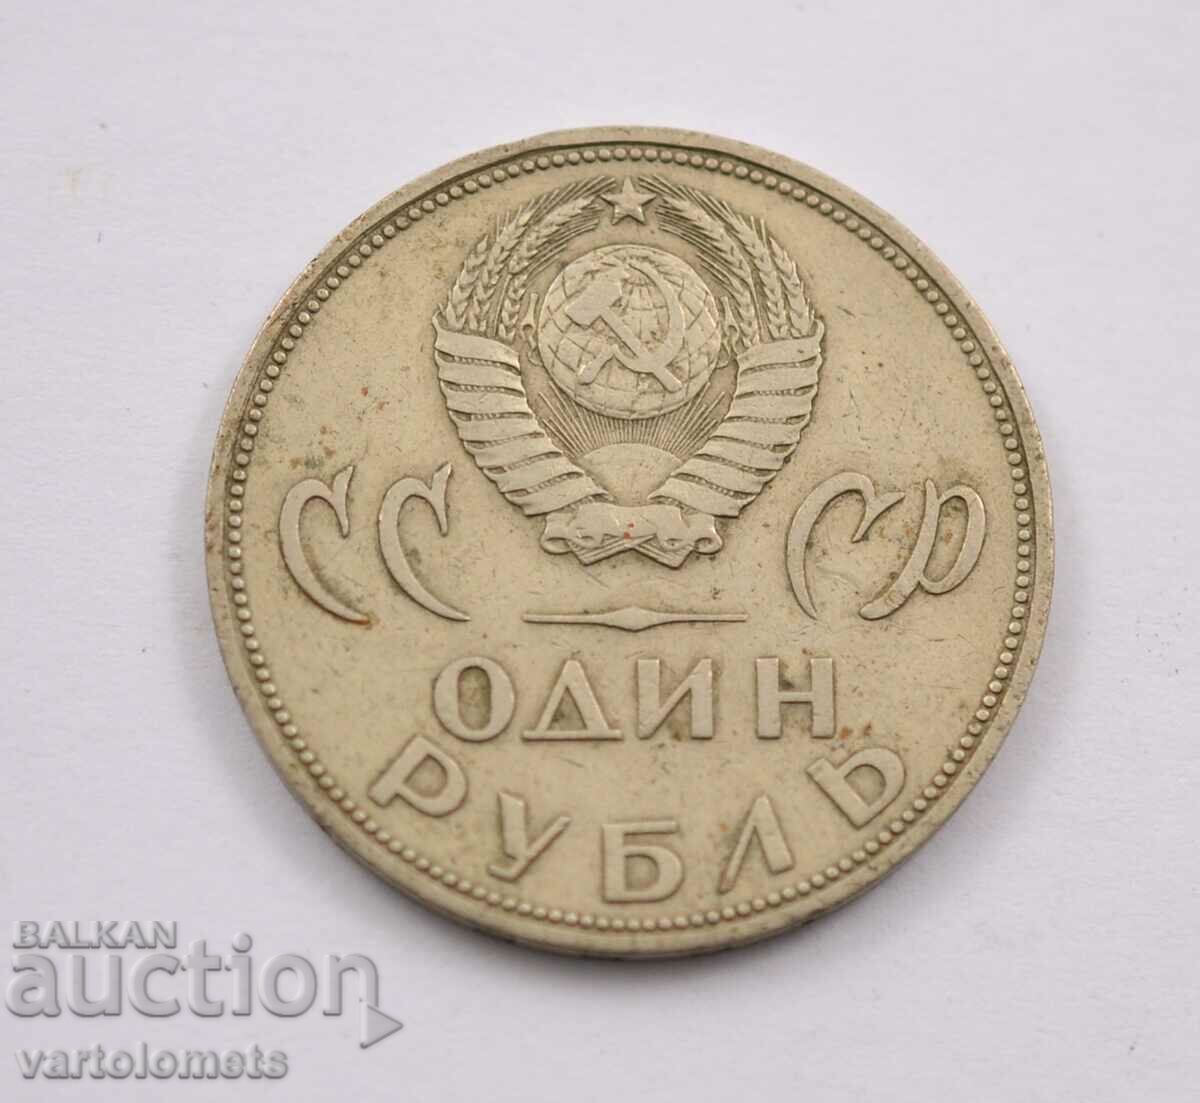 1 Ruble 1965 - CCCP 20 years since the victory over Nazi Germany